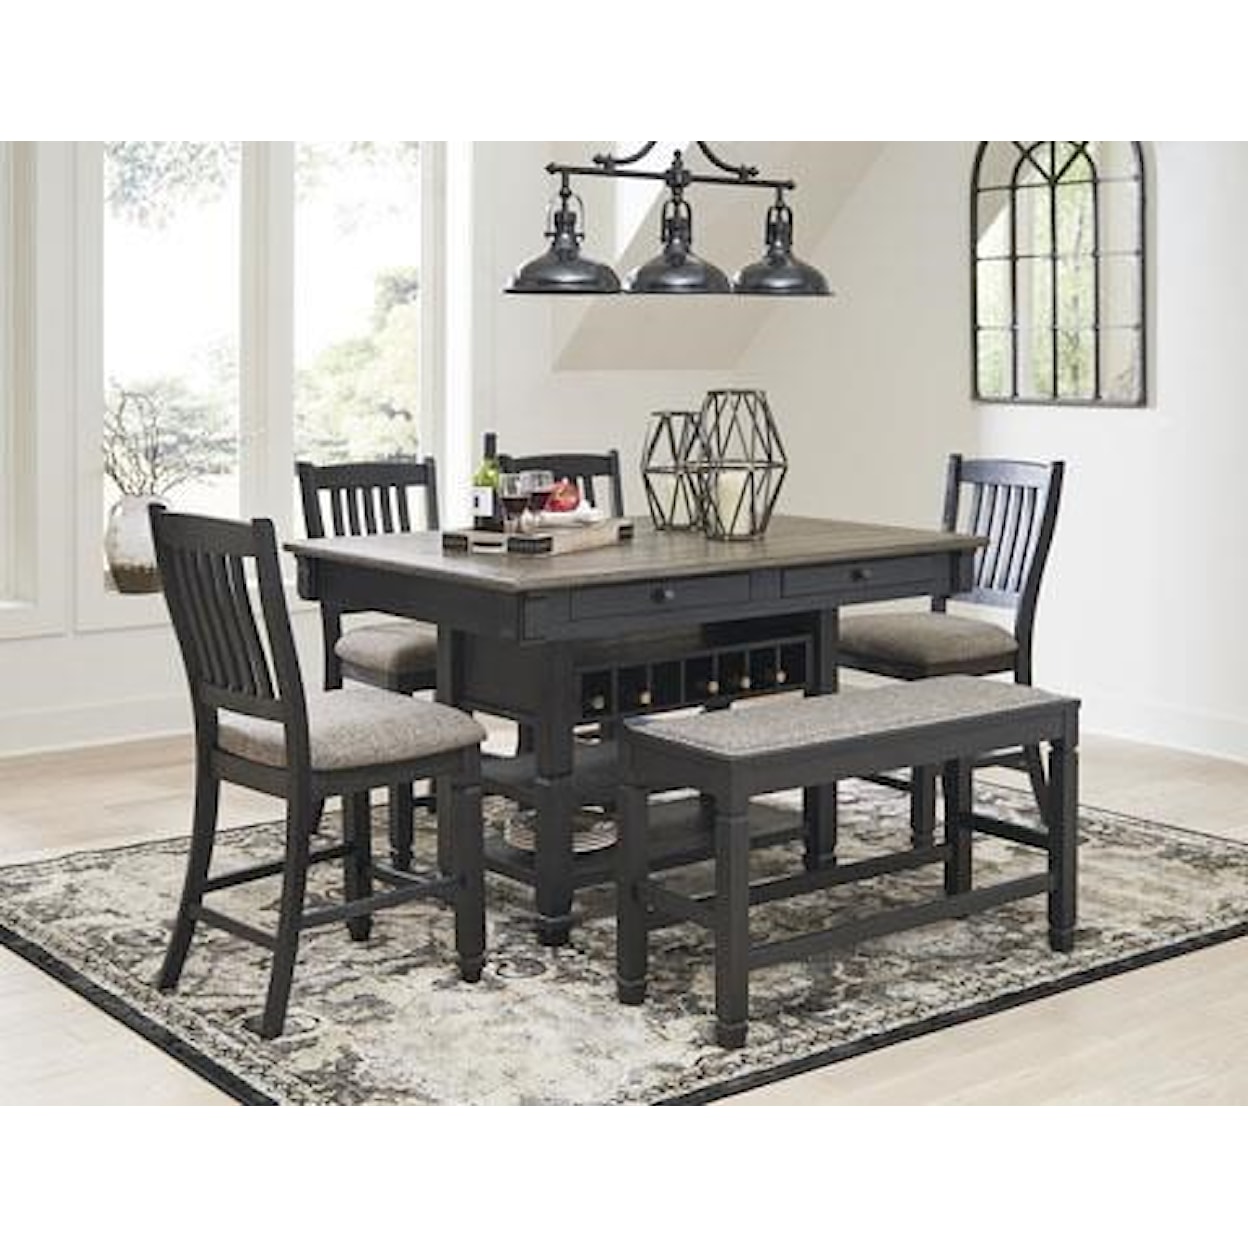 Signature Design by Ashley Tyler Creek 6-Piece Counter Table with Bench and Stools